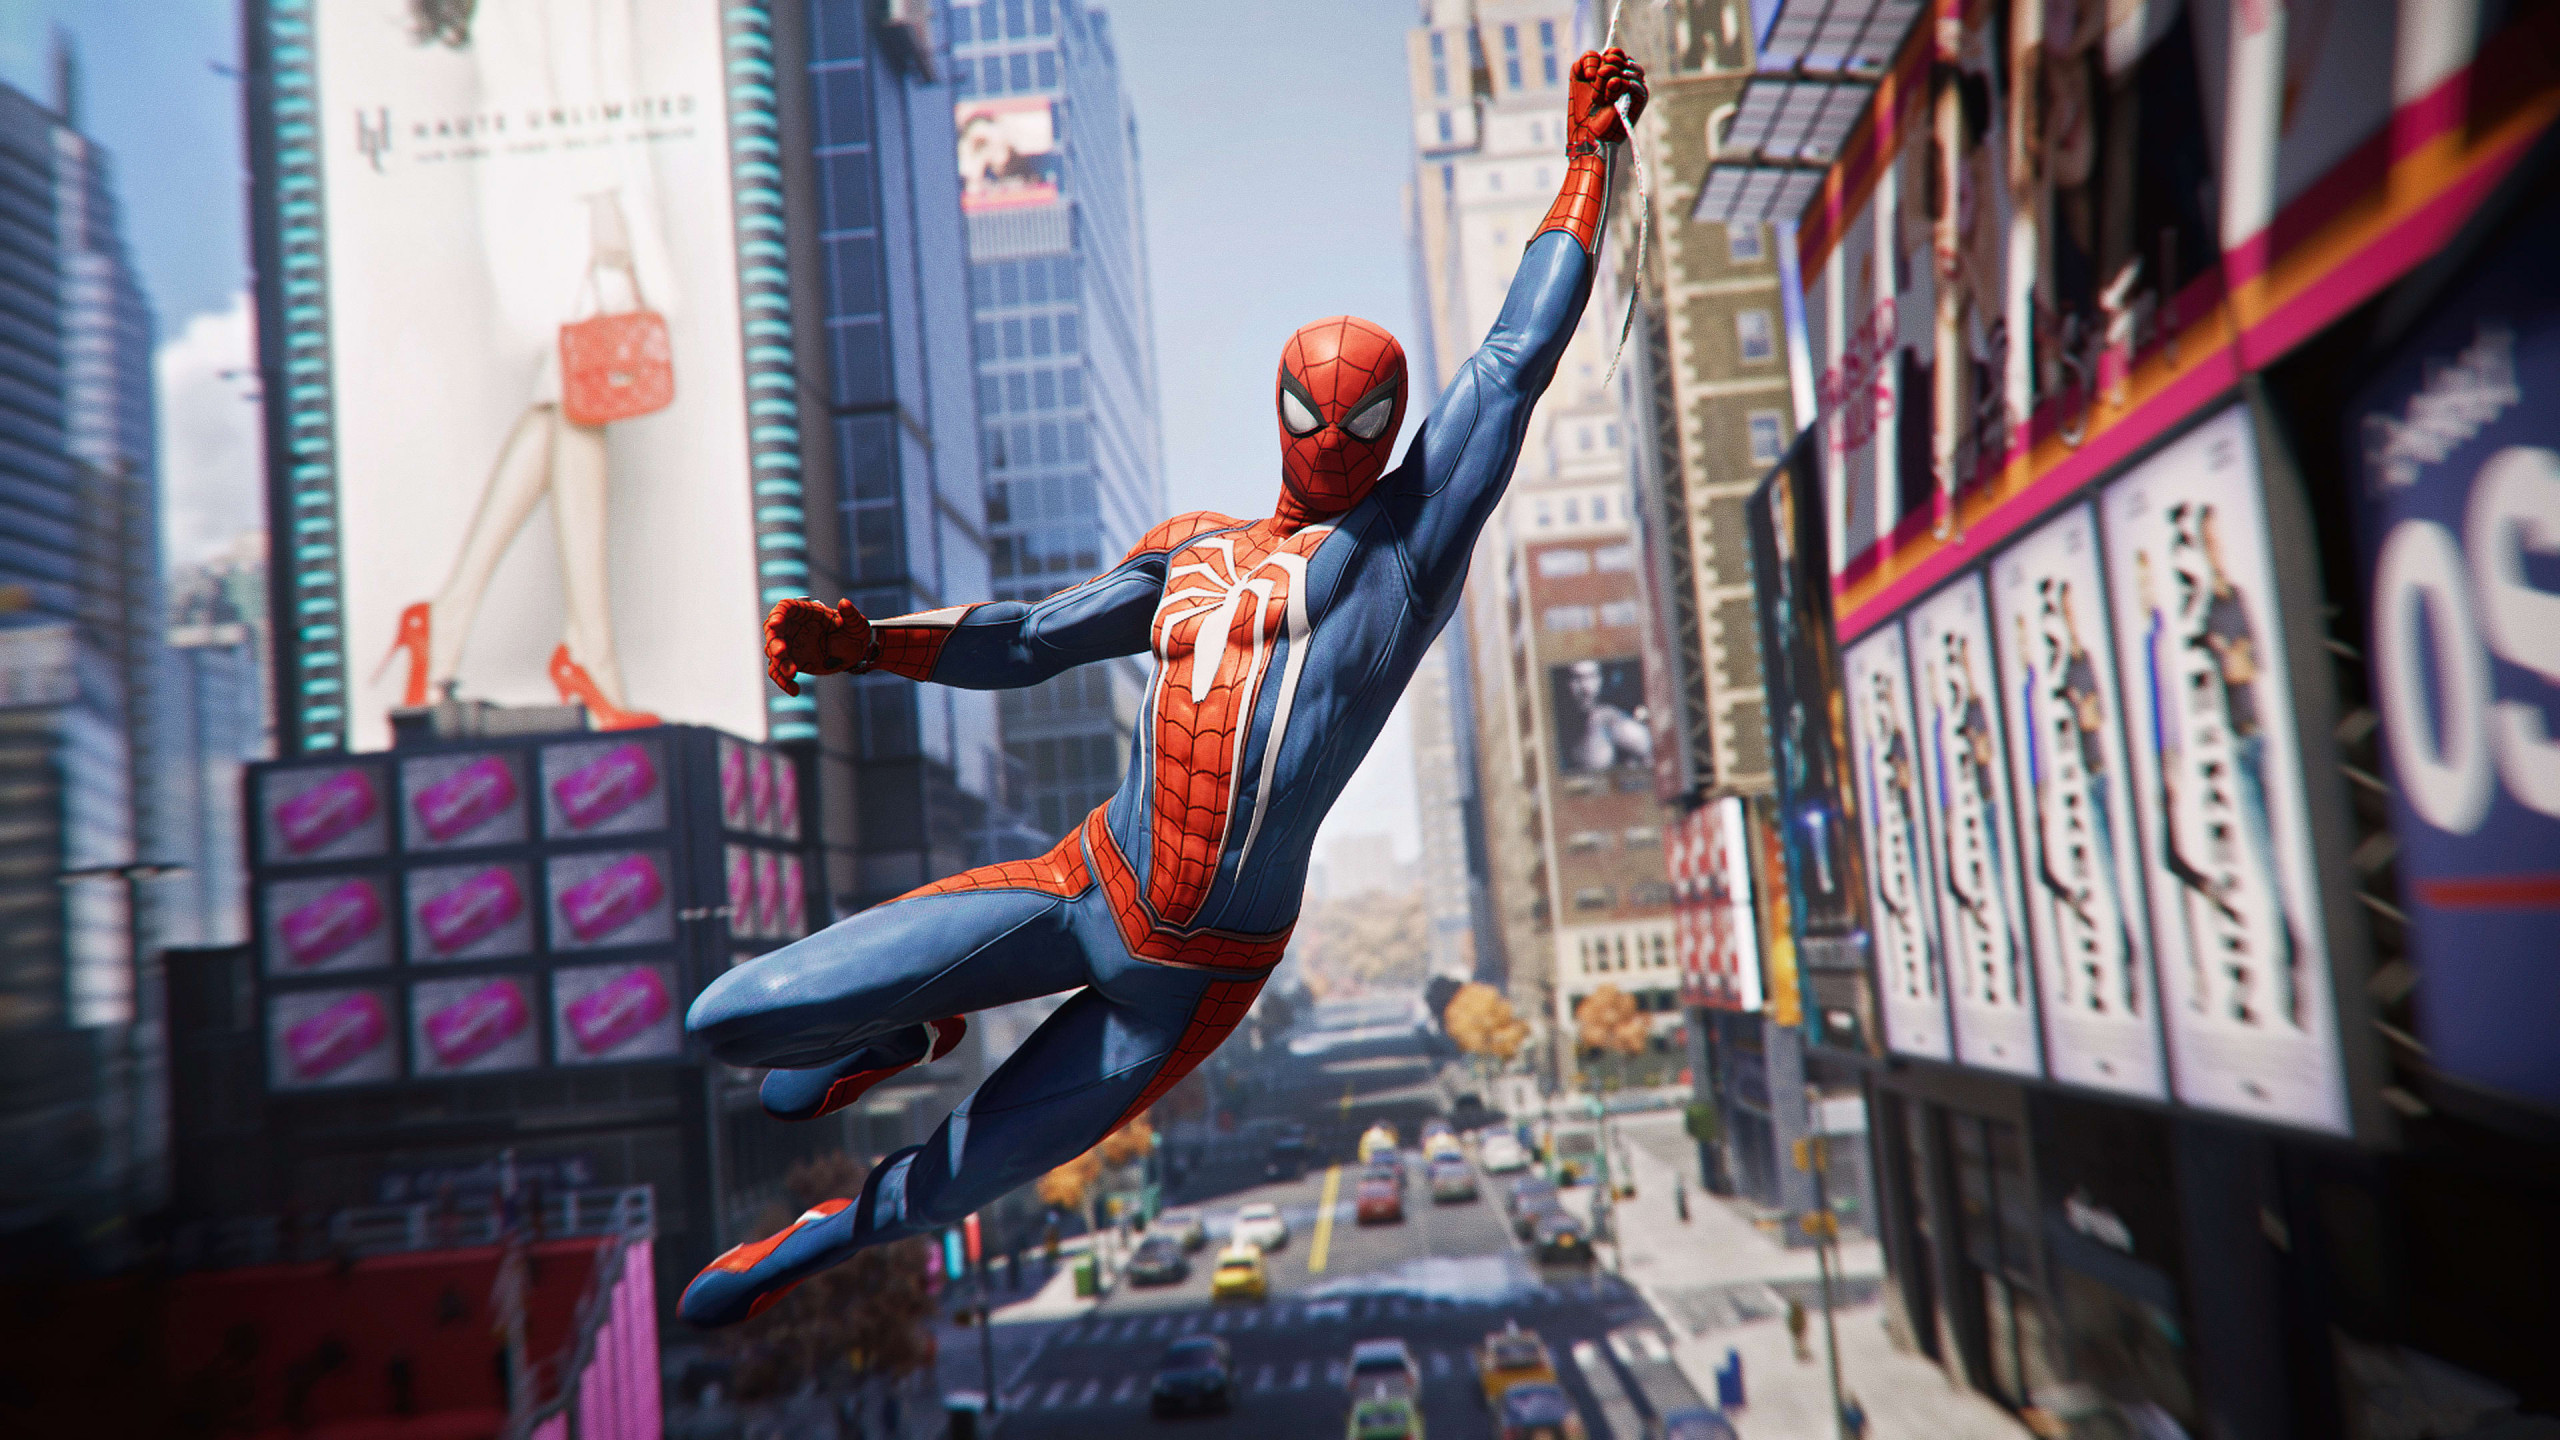 Spider Man from the video game wallpaper 2560x1440